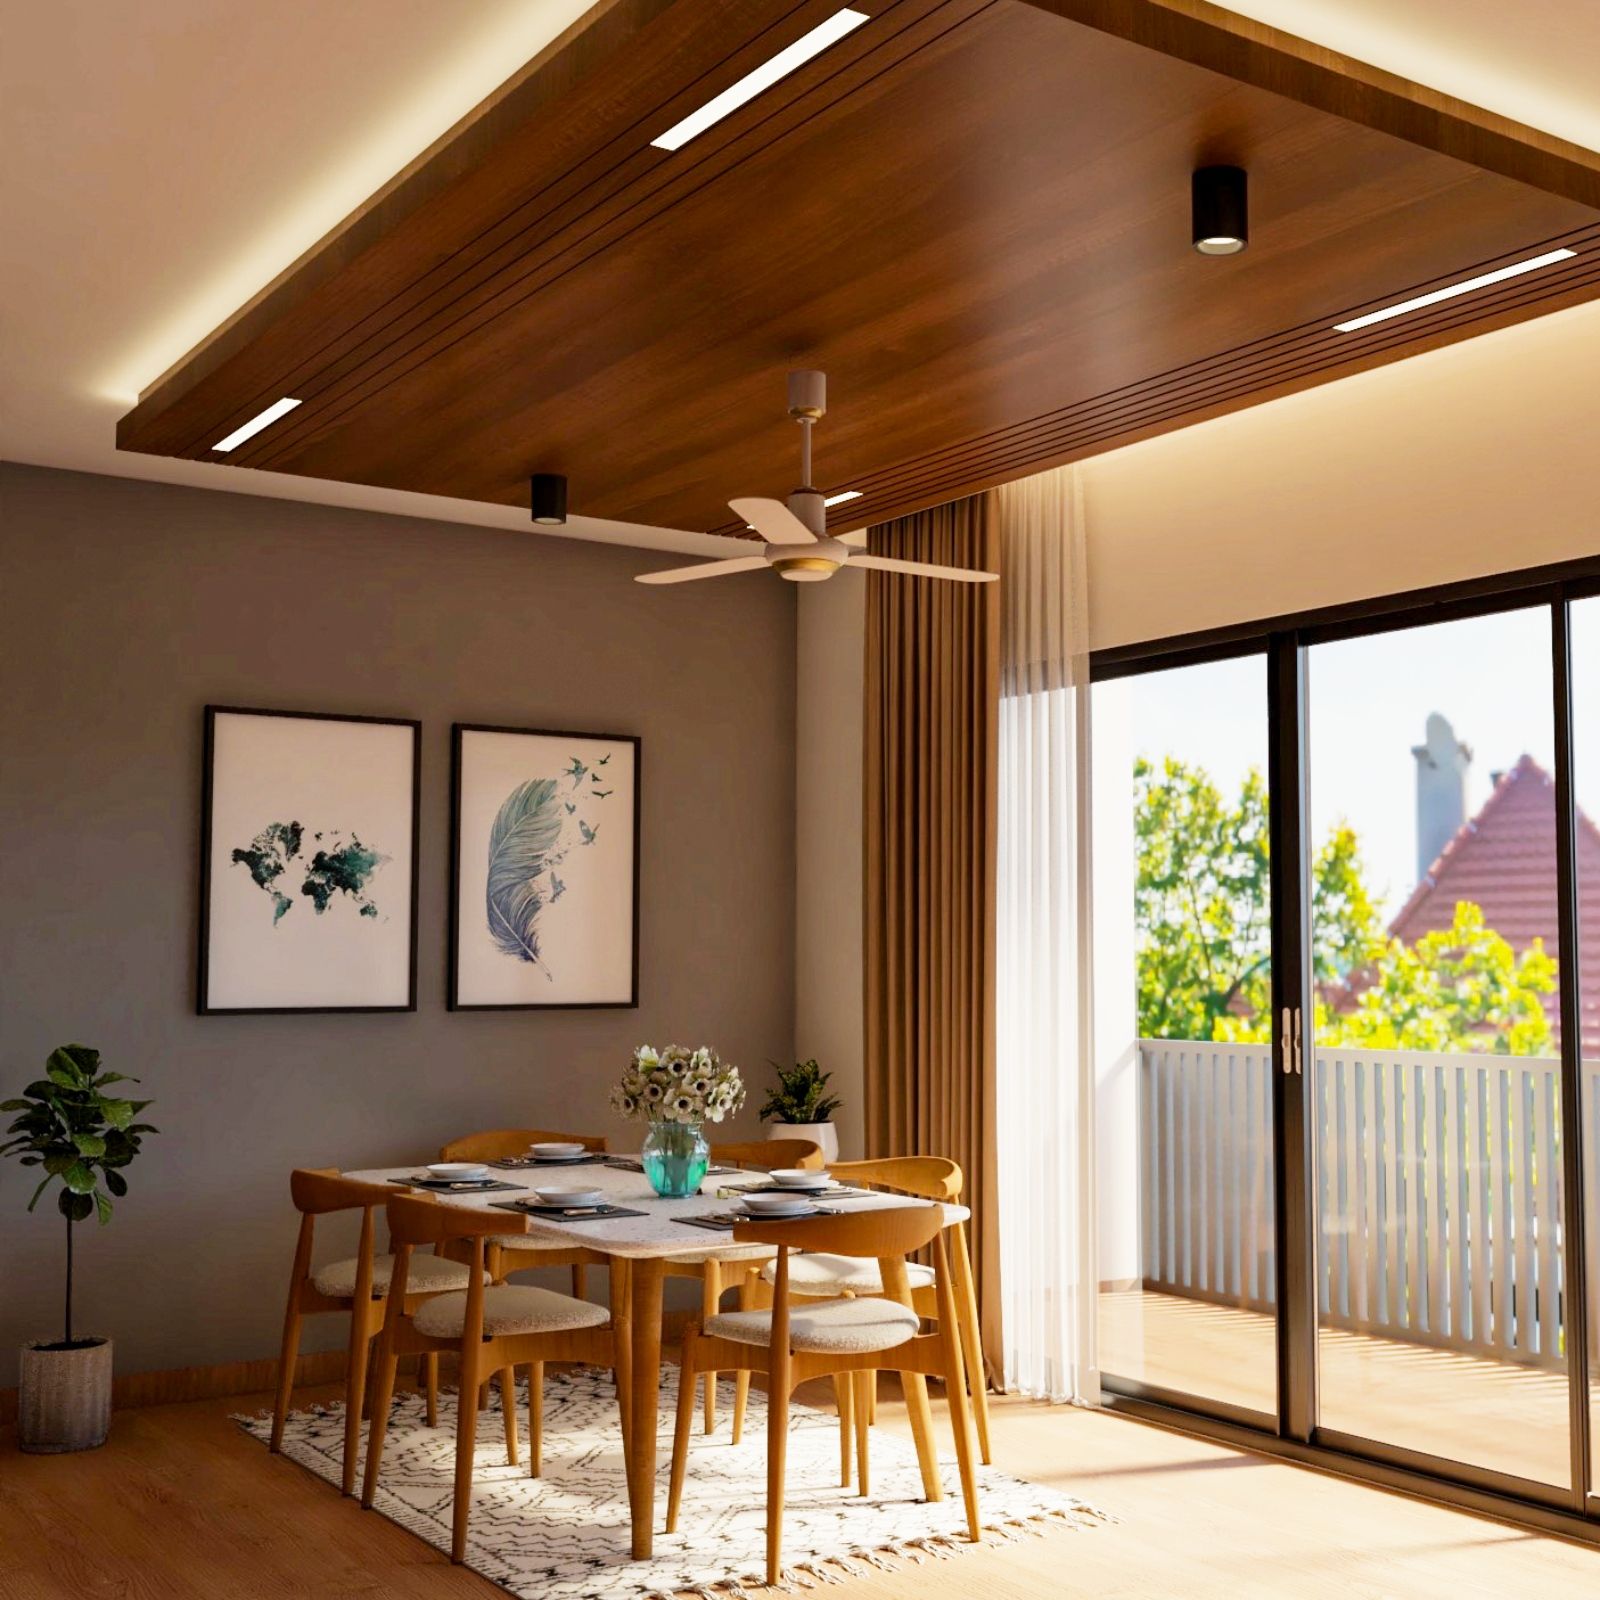 Rectangular Wooden False Ceiling Design With Recessed Cove Lights